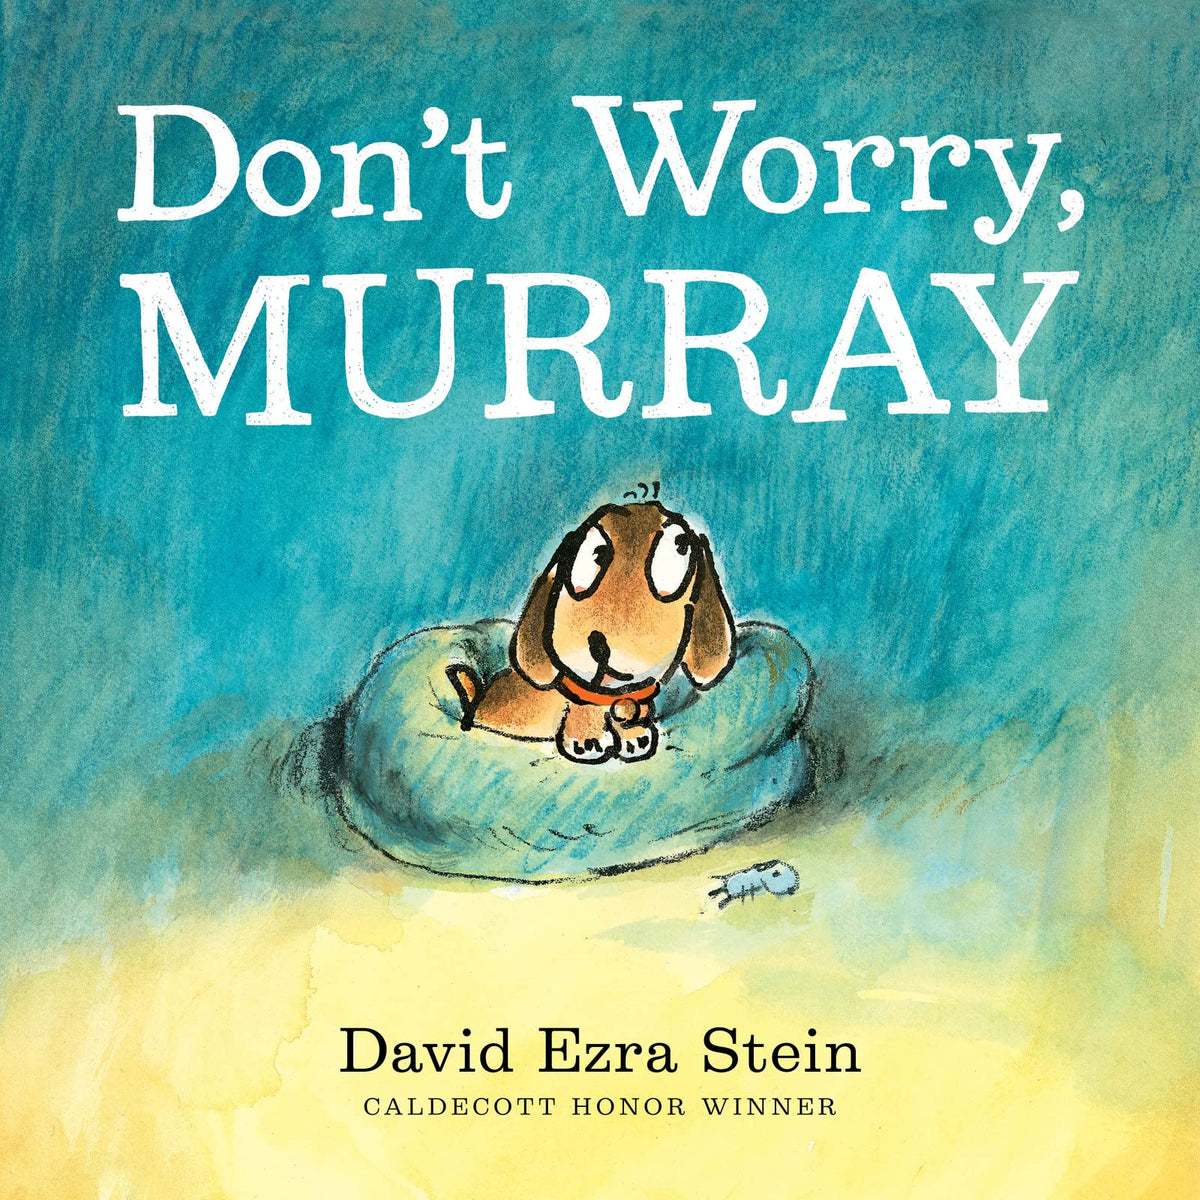 books for kids mental health, books for kids with anxiety, mental health childrens book, books for childrens mental health, children&#39;s book with important message, dont worry murray